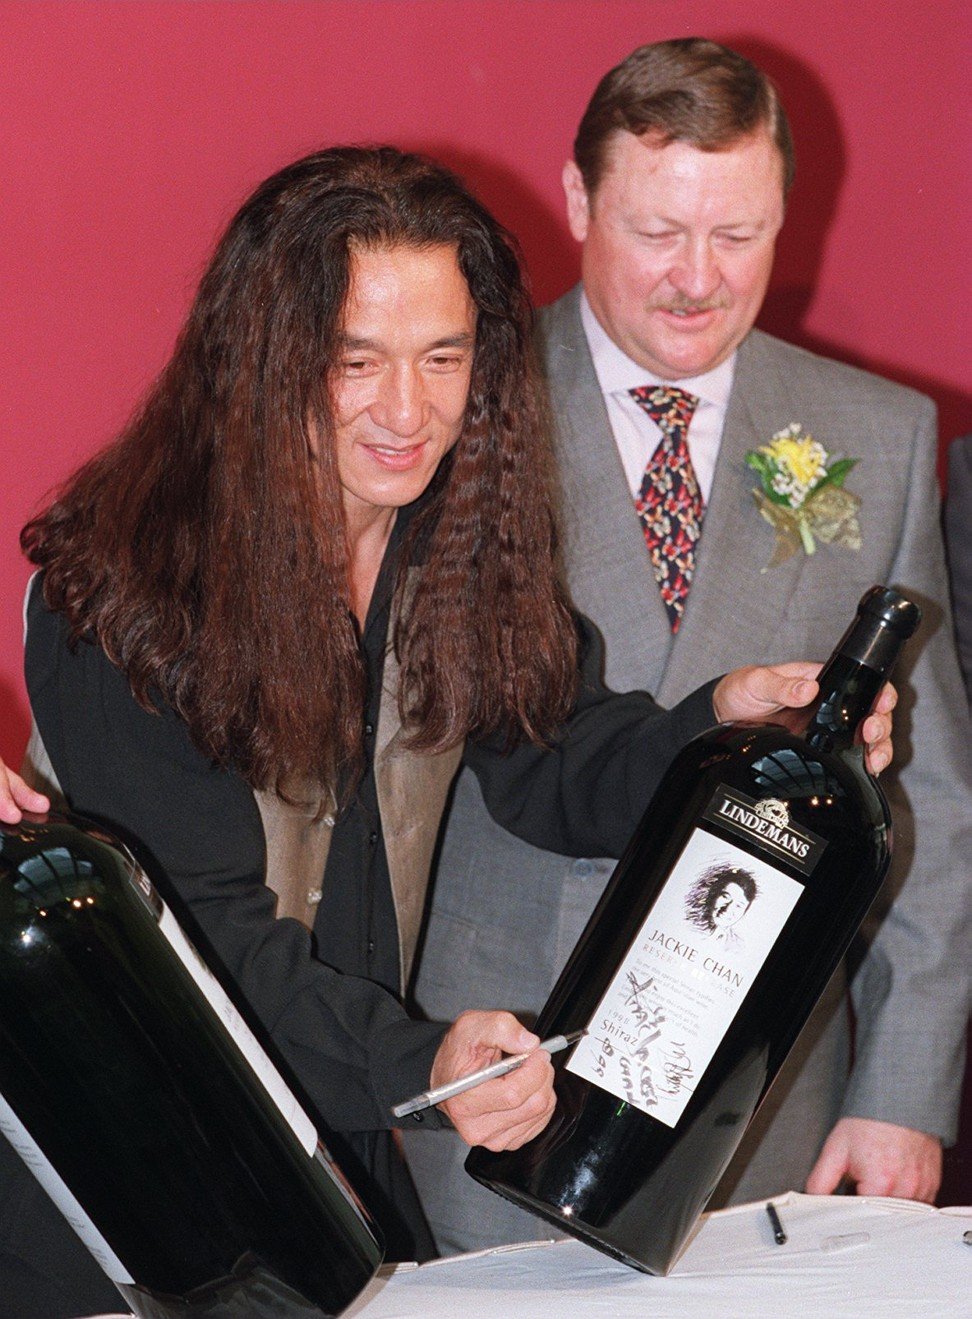 The actor with winemaker Philip John at the launch of Chan’s new wine, in 1999.